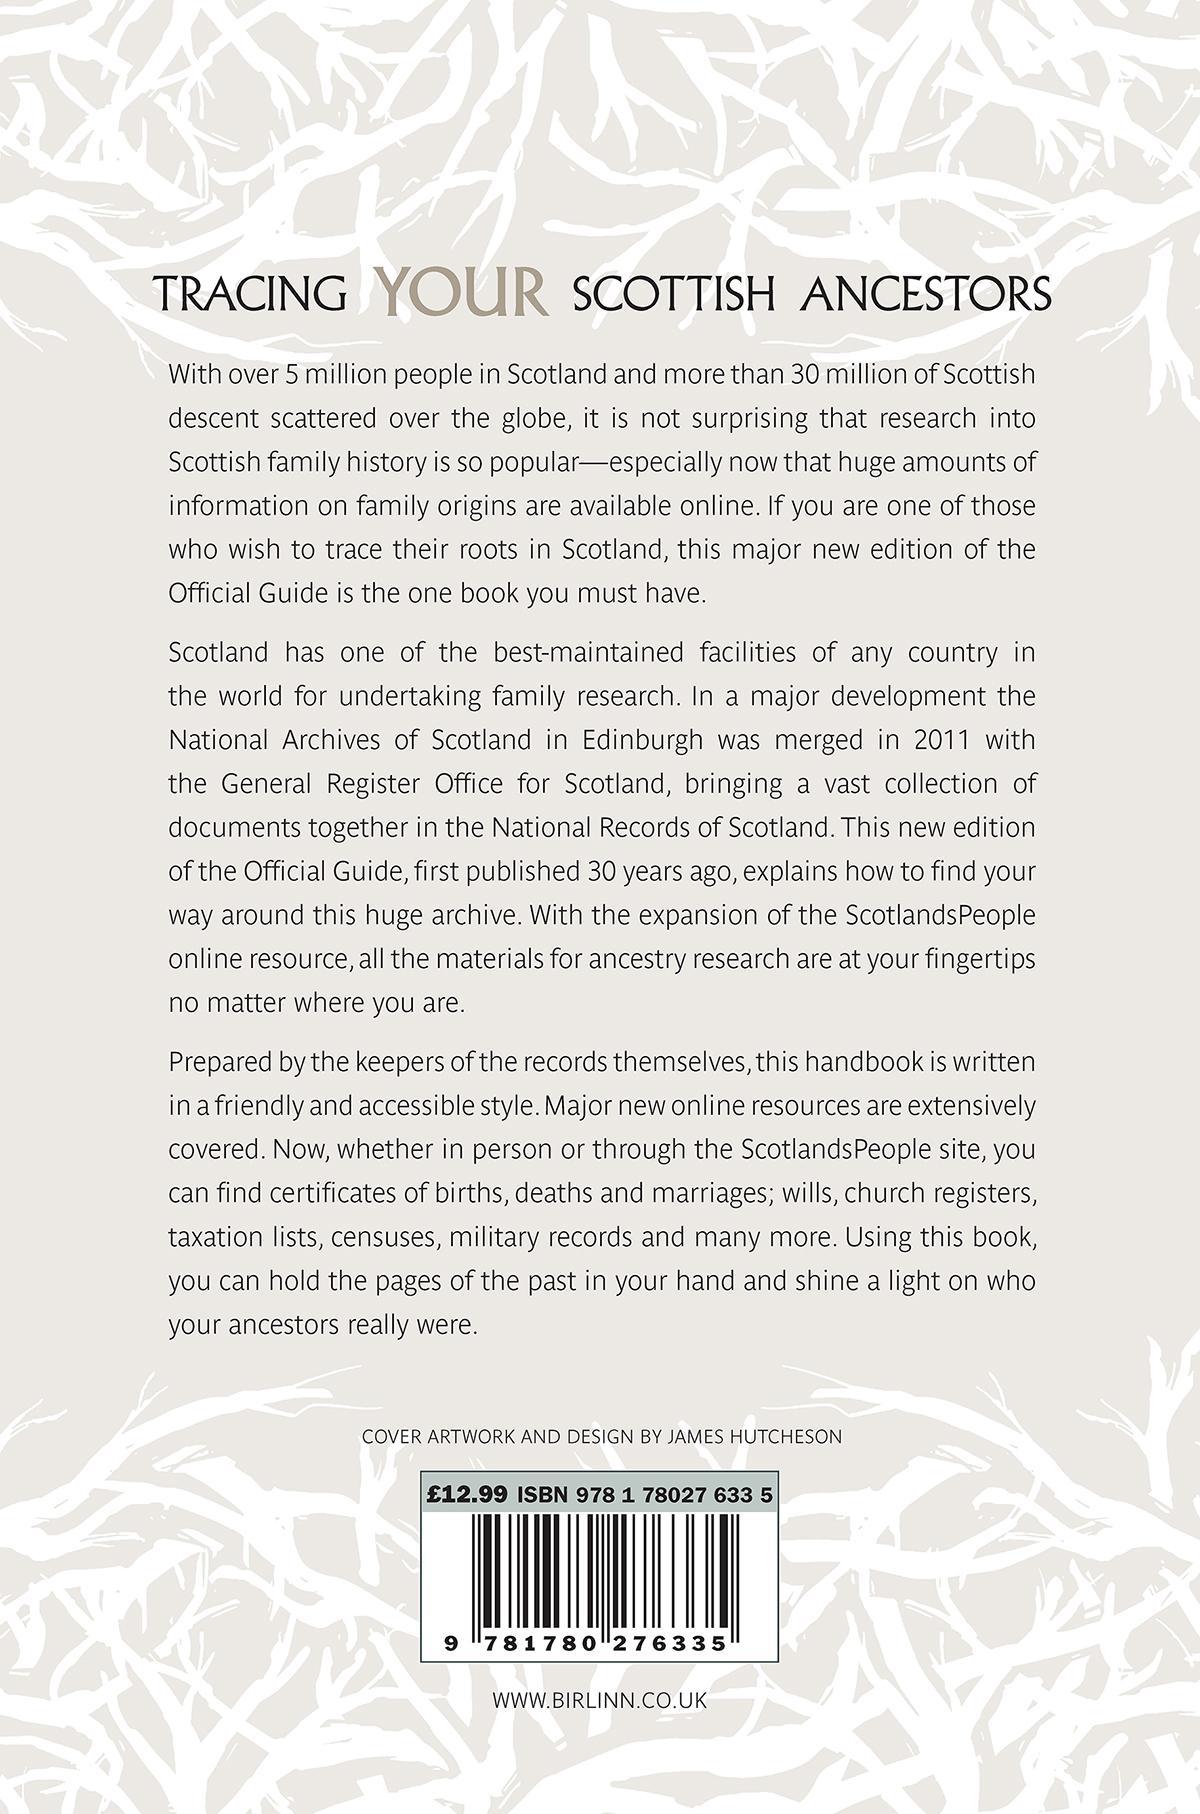 Tracing Your Scottish Ancestors - back cover